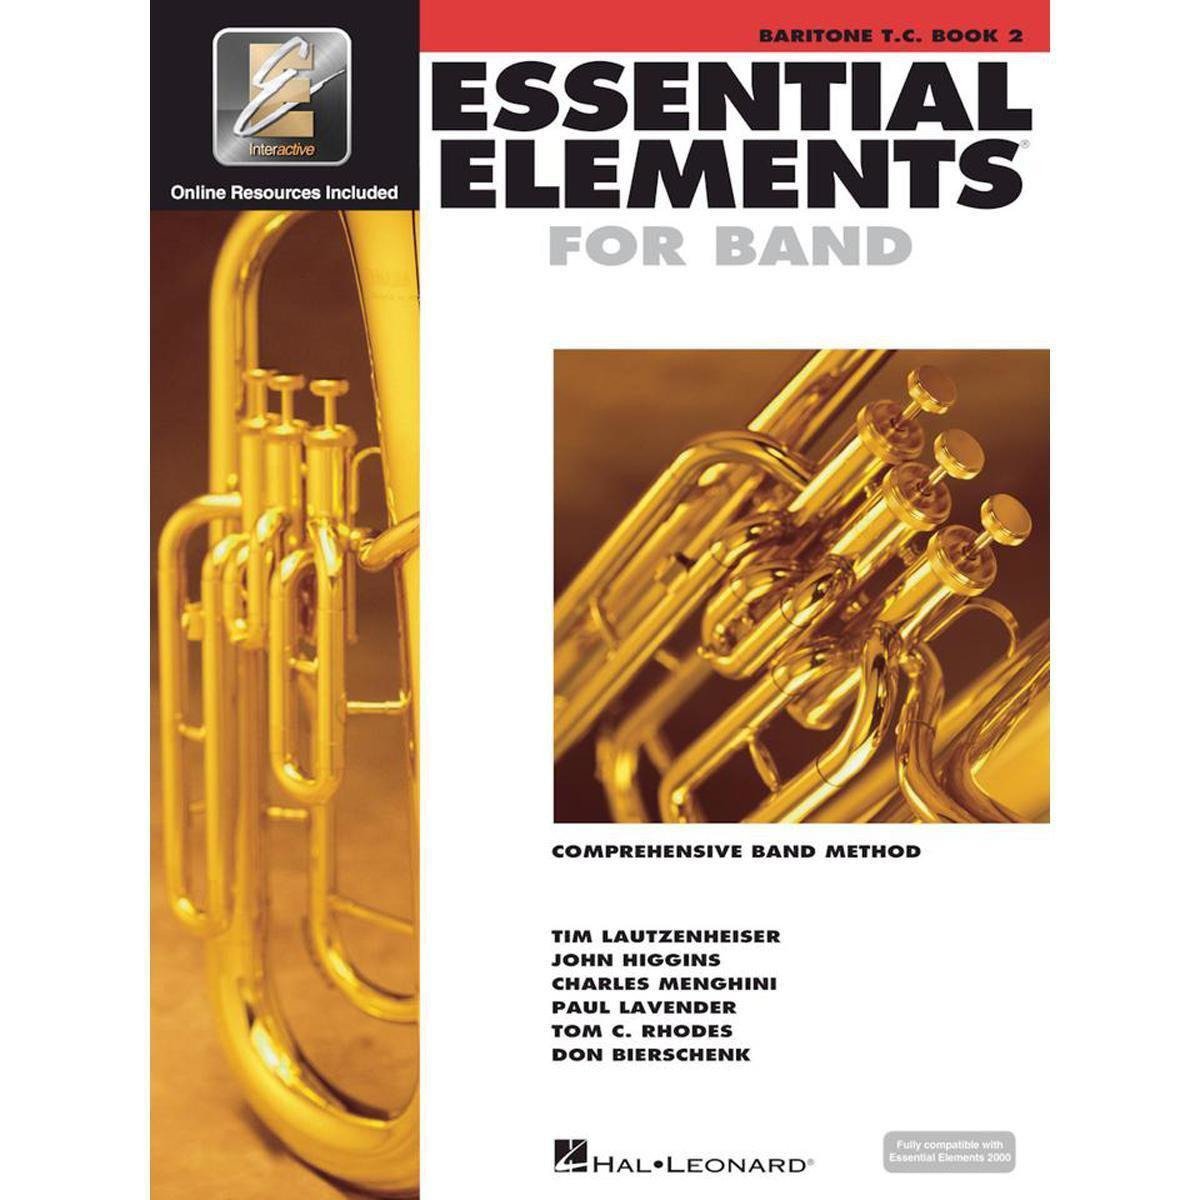 Essential Elements for Band Book 2-Baritone T.C.-Andy's Music